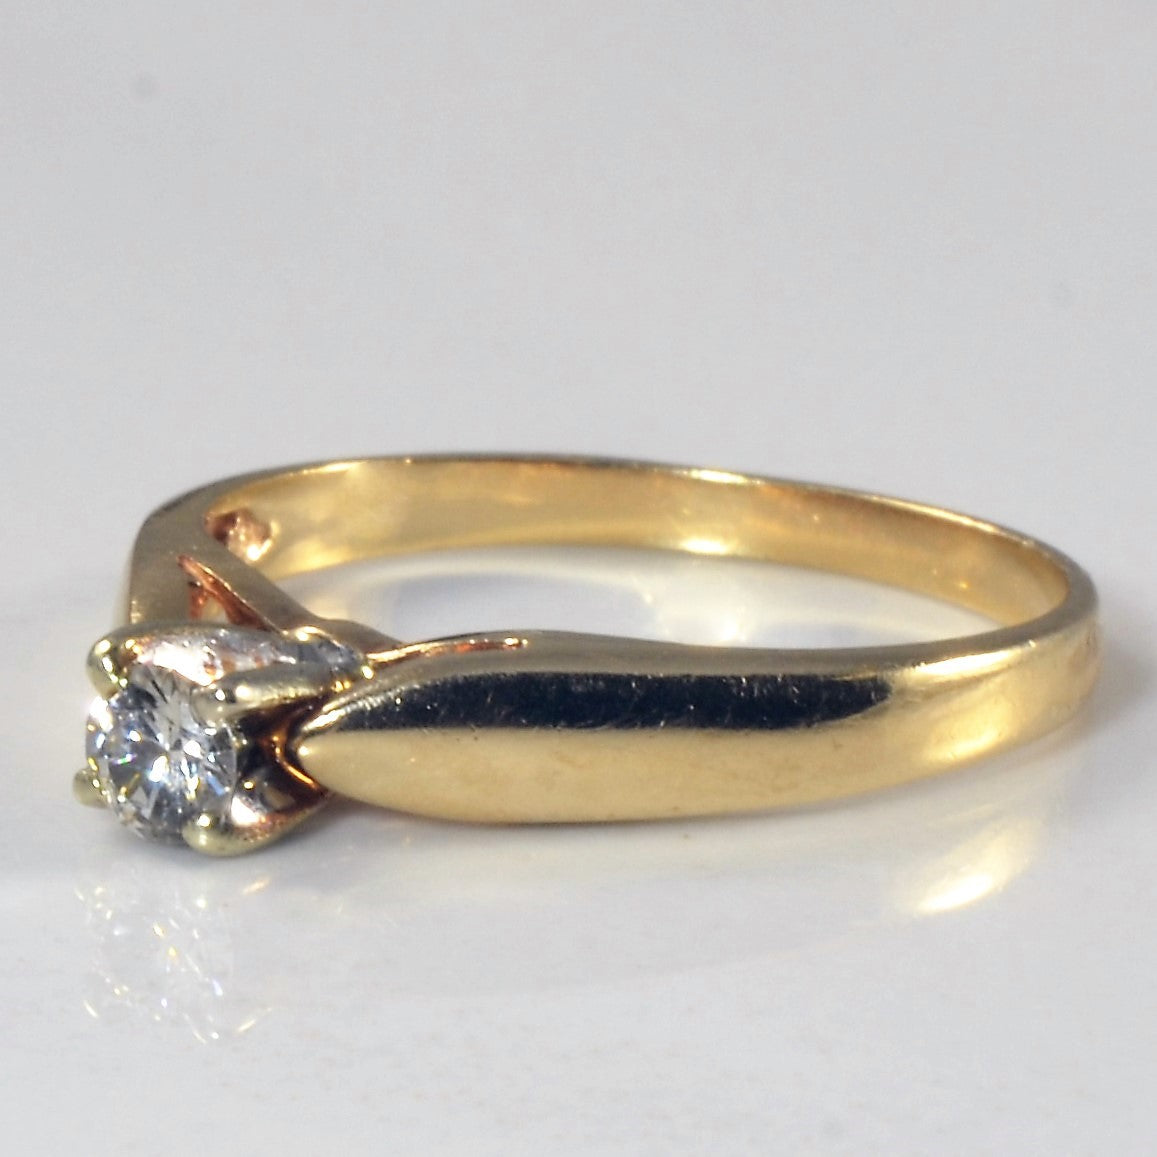 Yellow Gold Solitaire Diamond Ring | 0.15ct | SZ 6.75 |